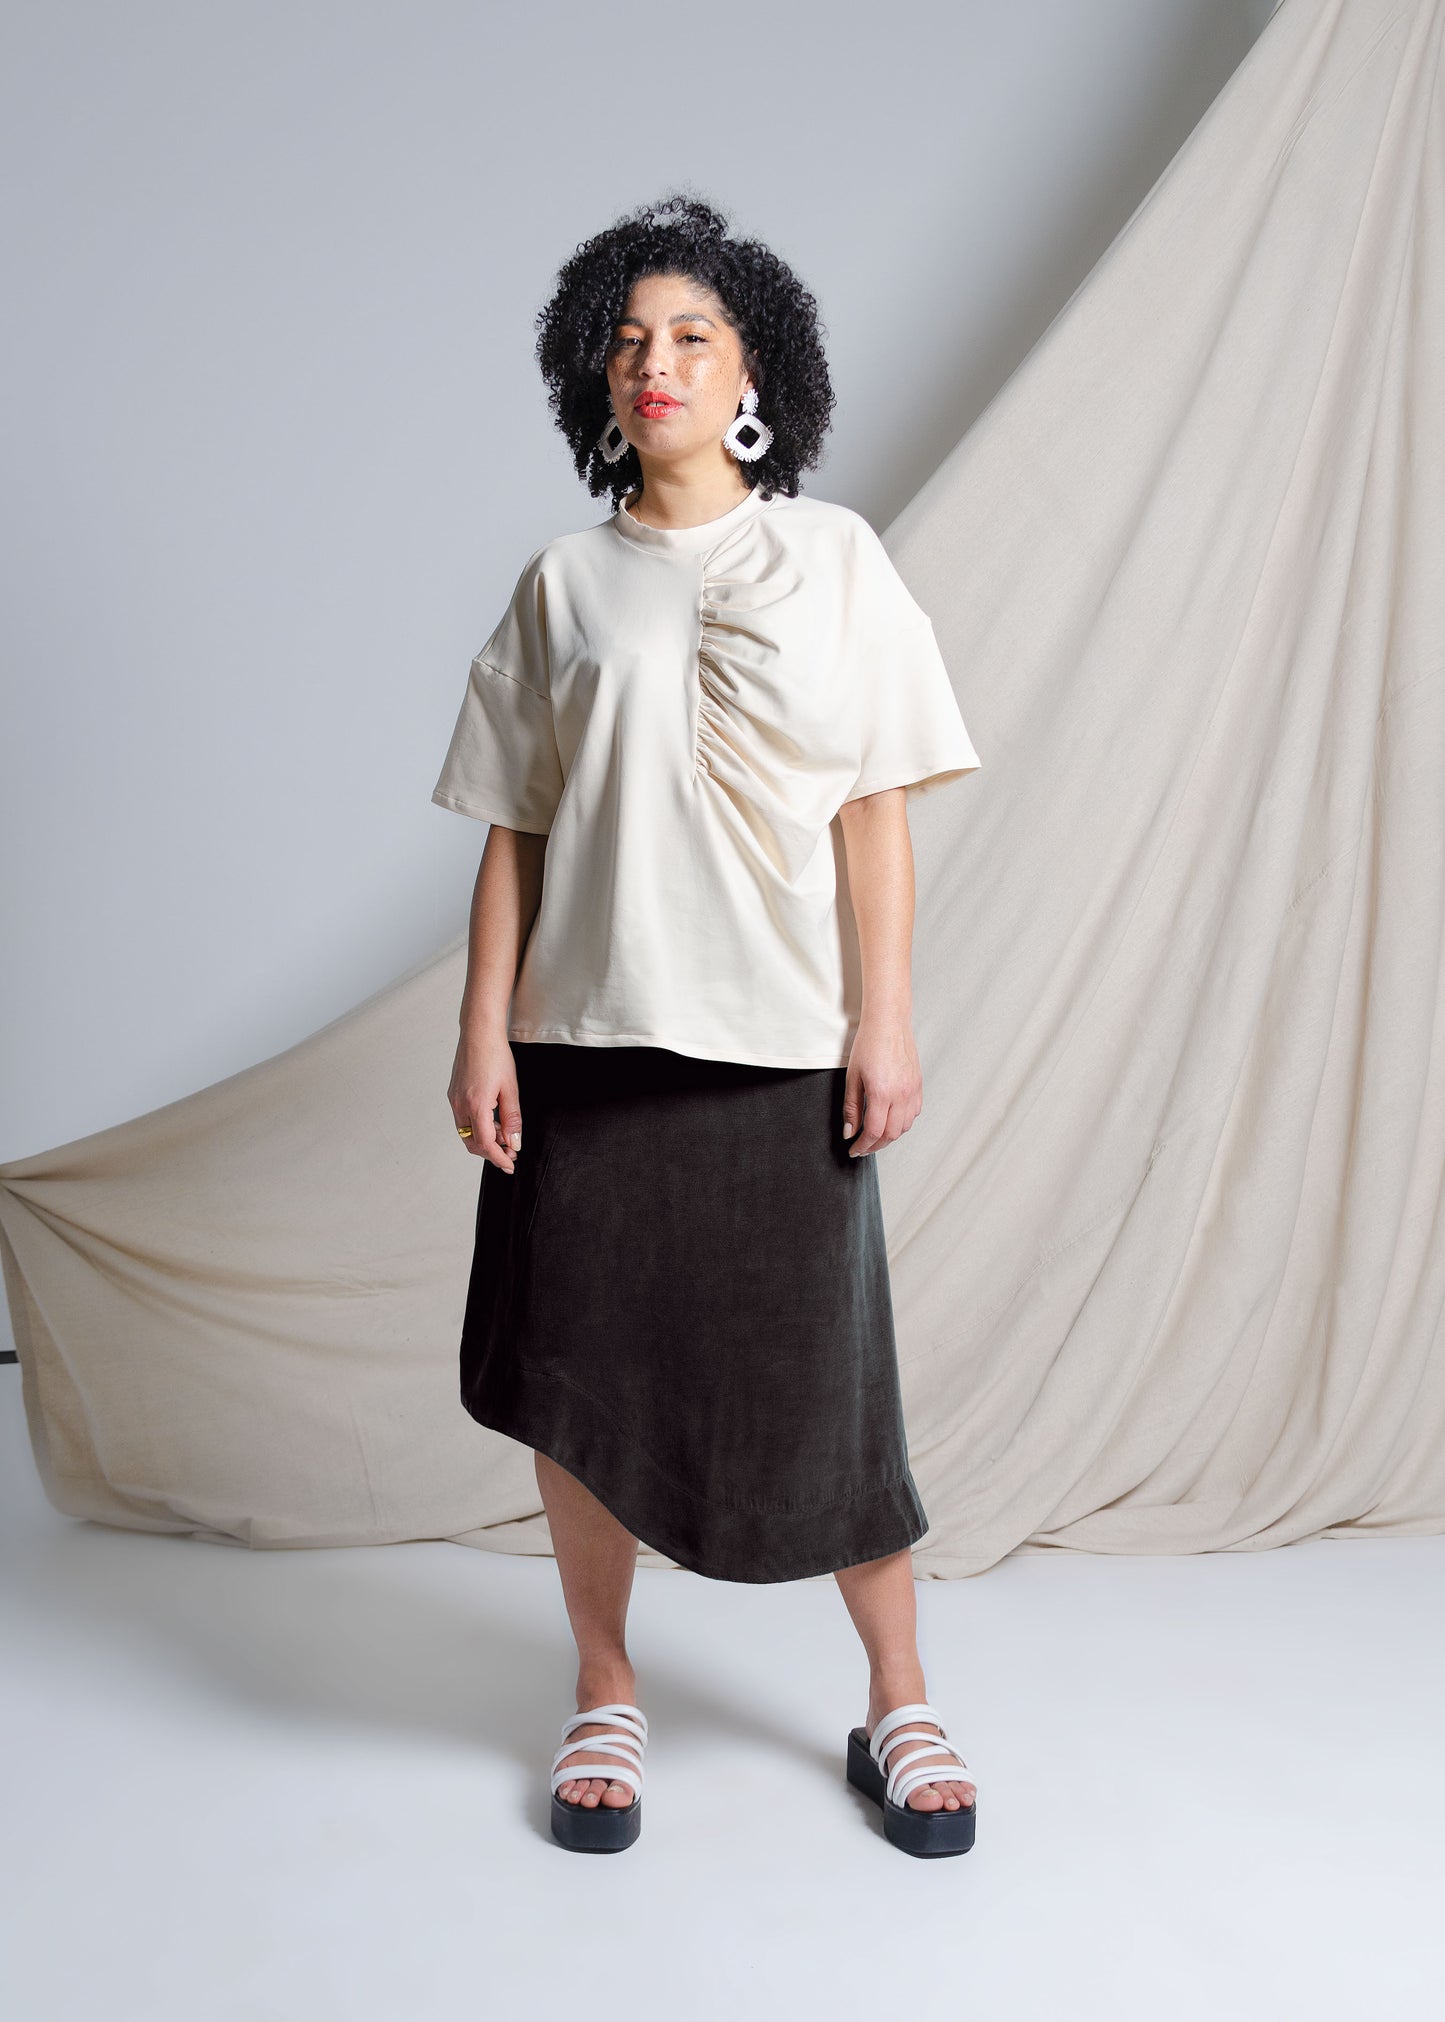 Curly haired model wears oversize cream cotton tank top with dropped shoulders and gathering detail at front. Black asymmetrical hem midi skirt made from textured cupro blend fabric